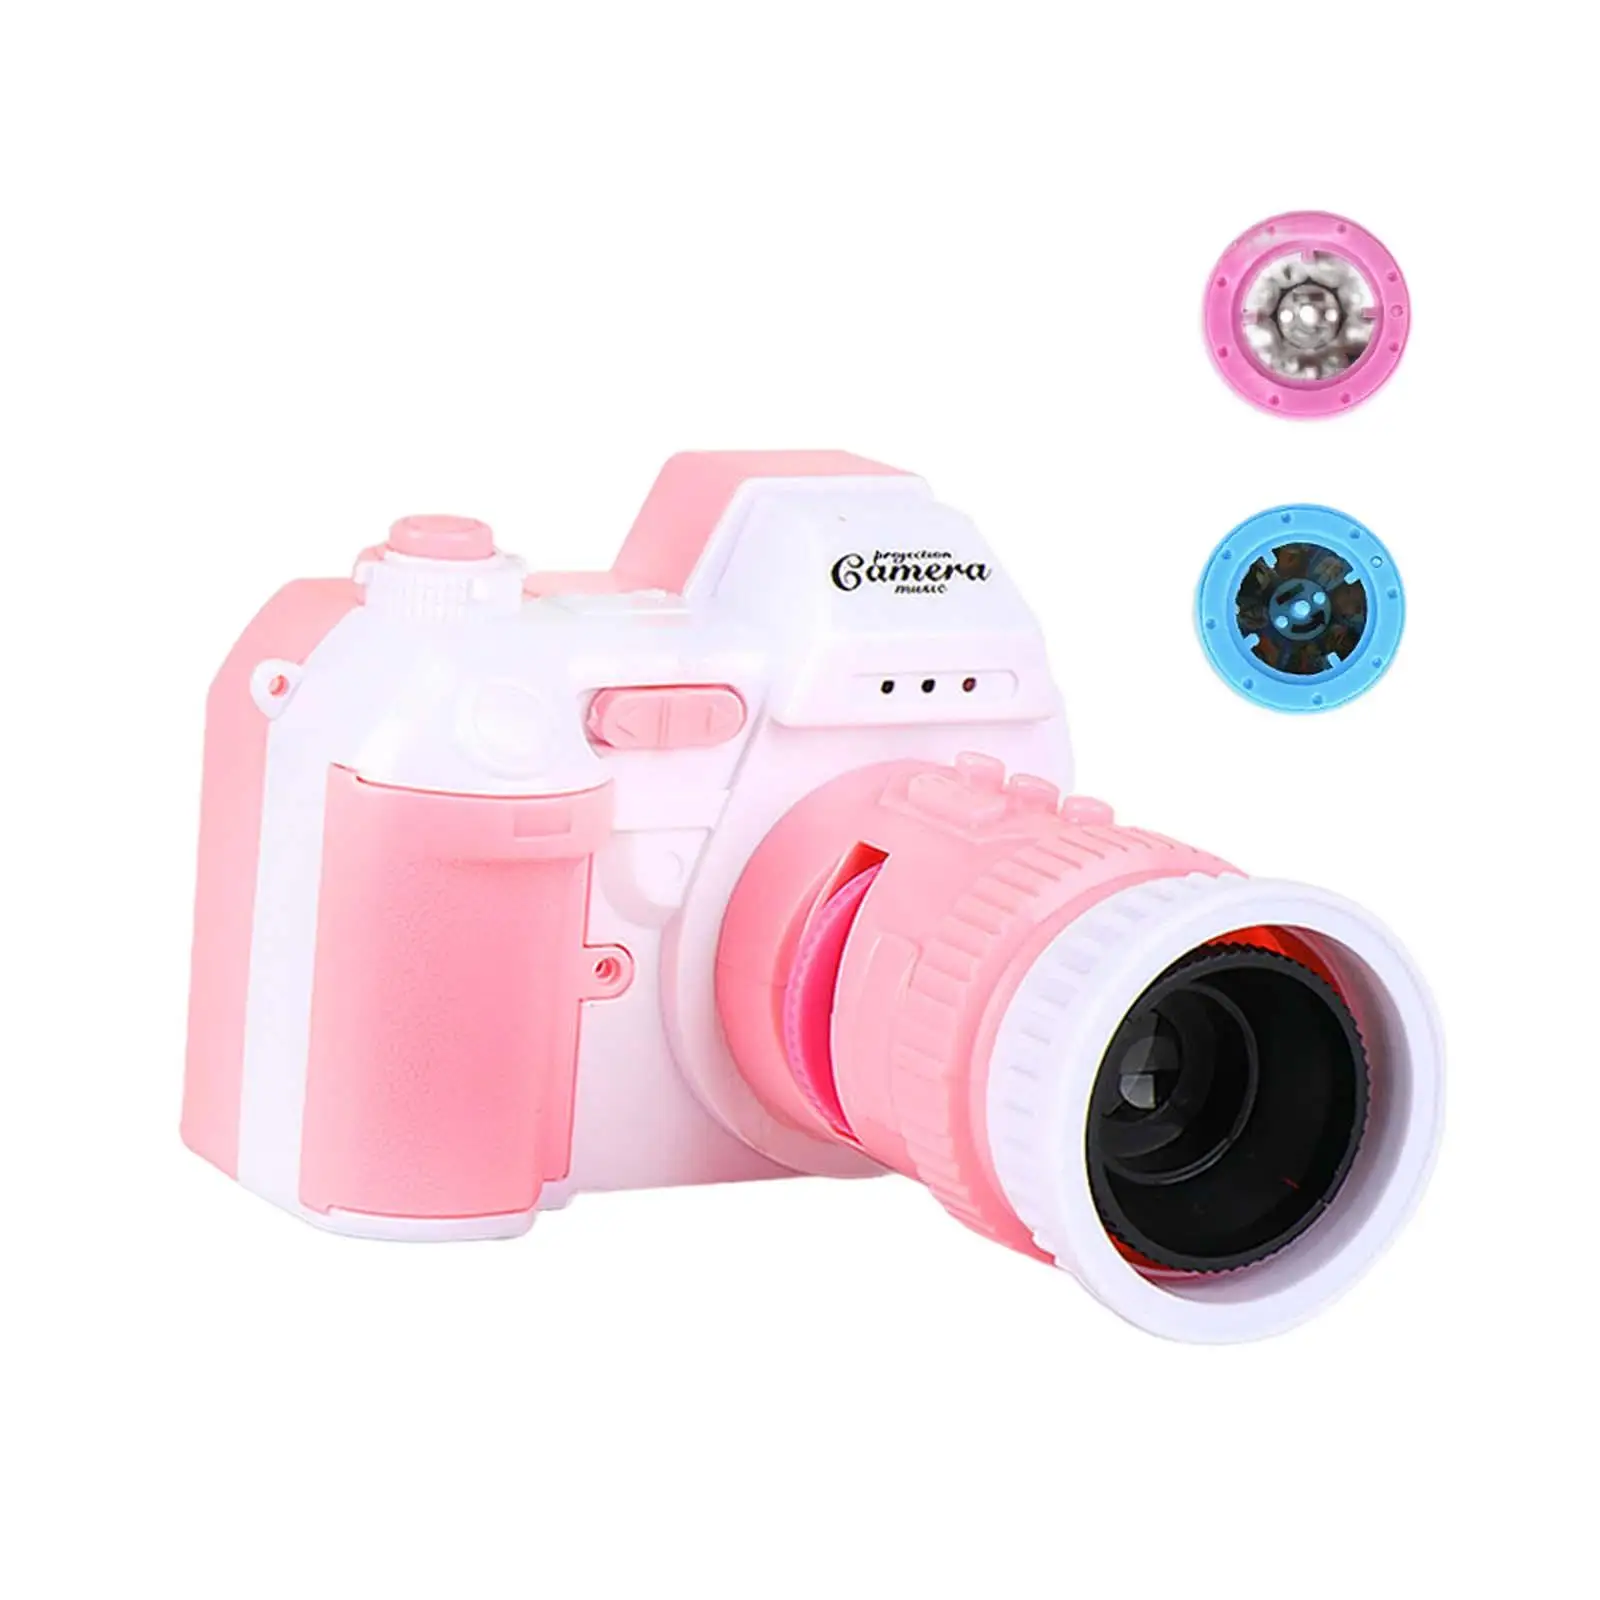 Projection Camera Toy with Light and Sounds for Children Day Birthday Gifts